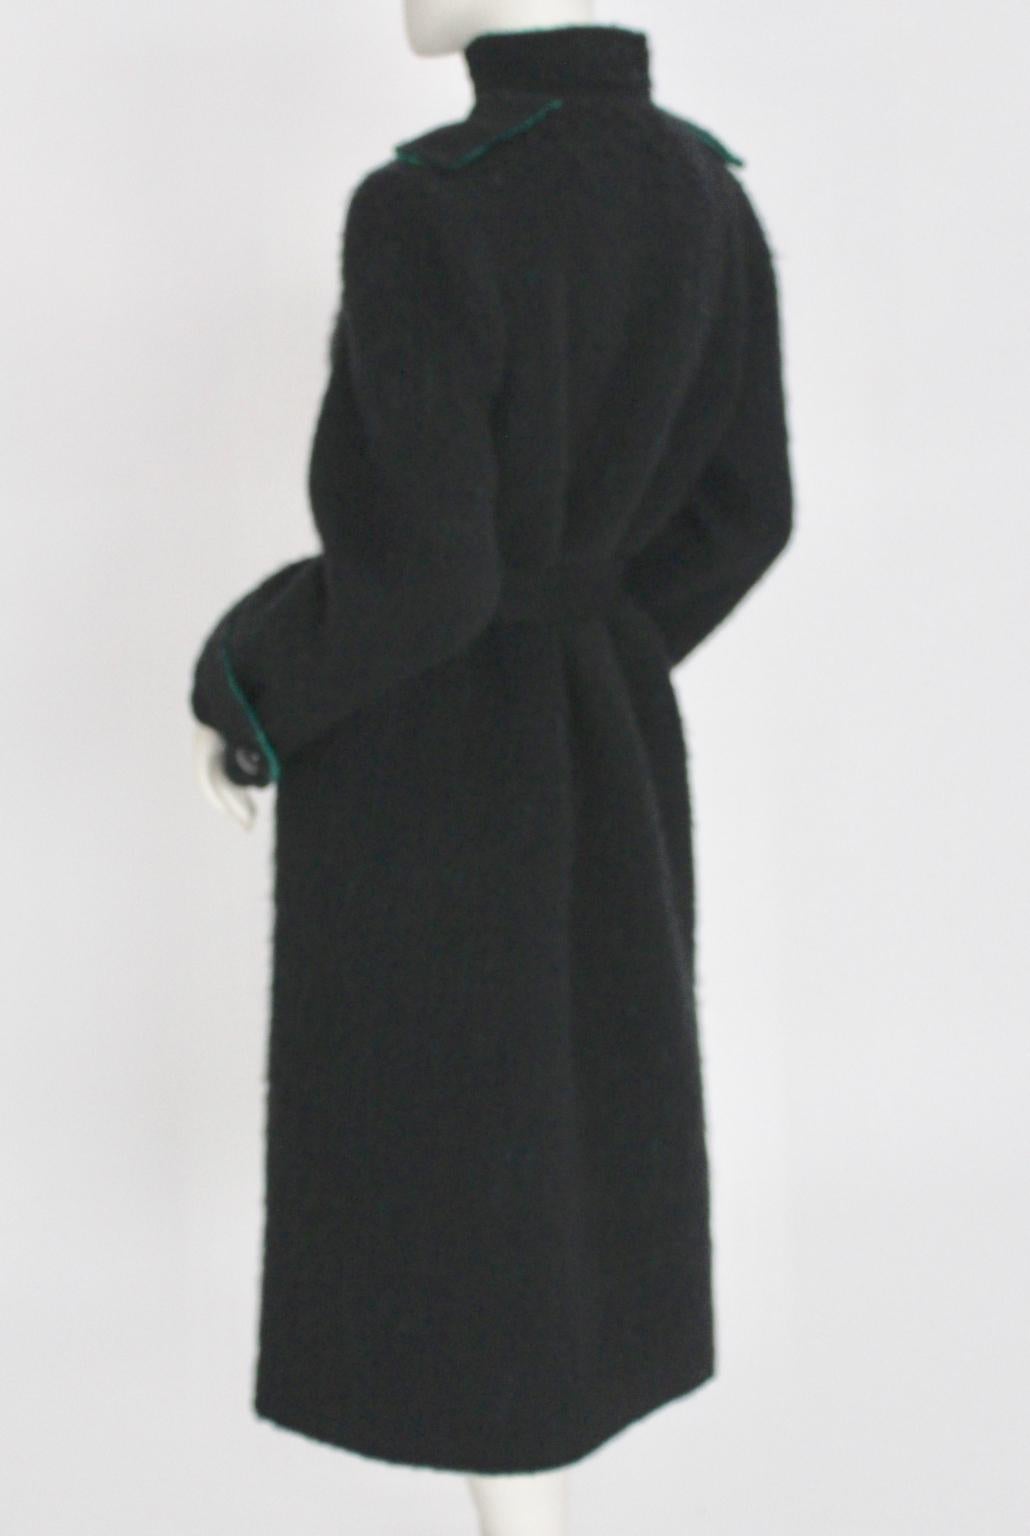 Lancetti Roma Vintage Black and Green Wool Coat 1970s In Good Condition For Sale In Vienna, AT